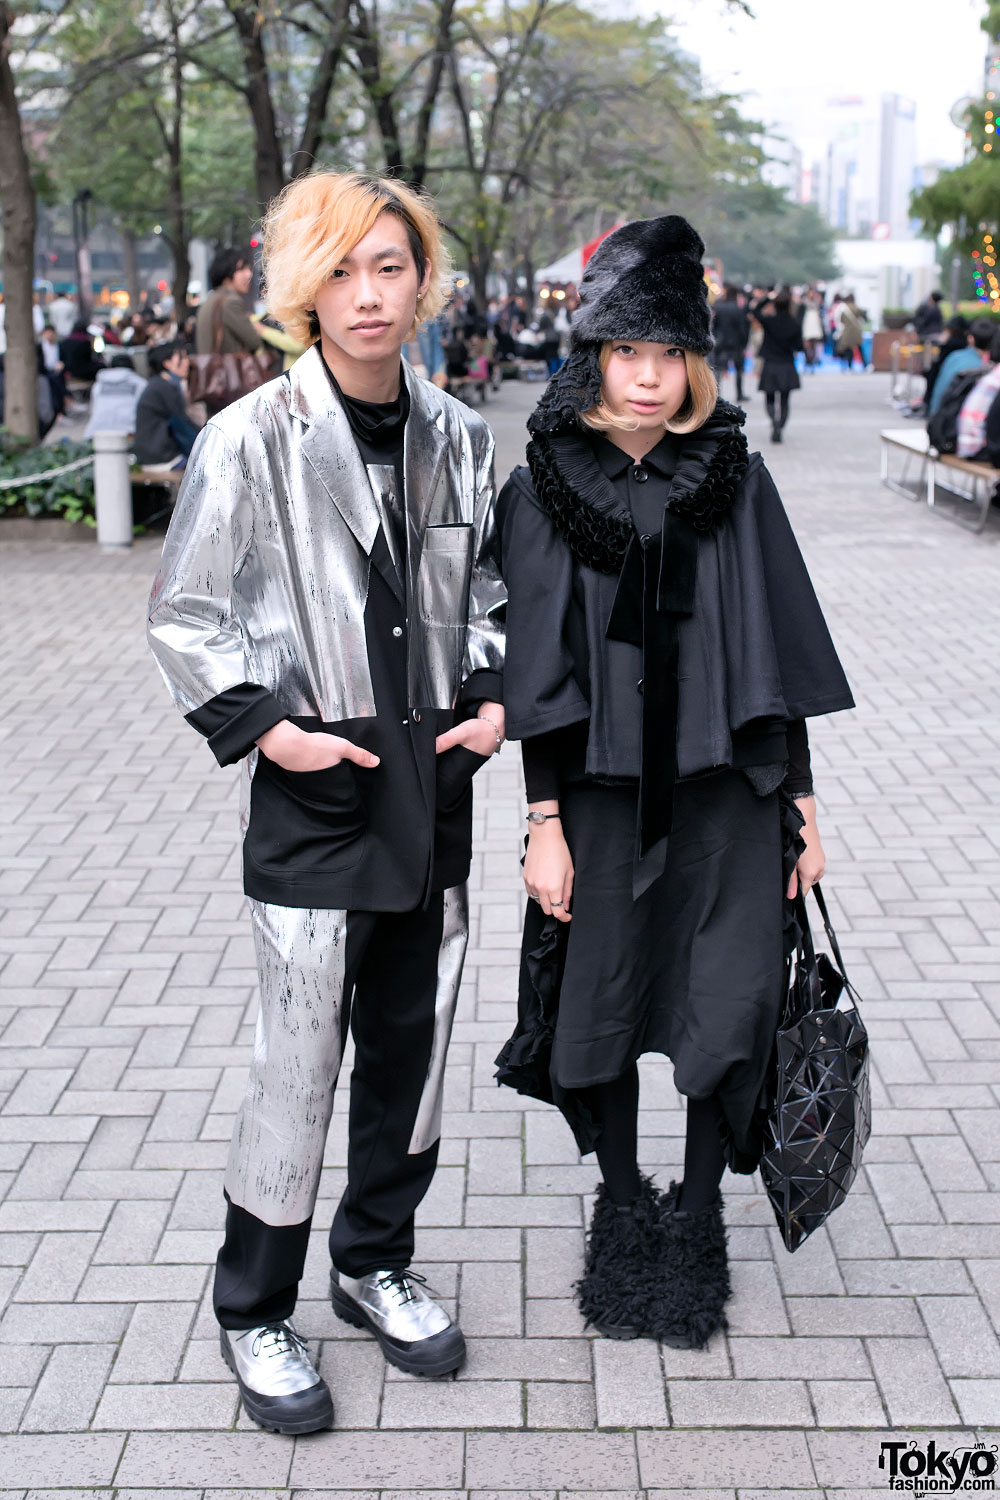 Silver Issey Miyake Suit & Comme des Garcons Monochrome Look in Tokyo